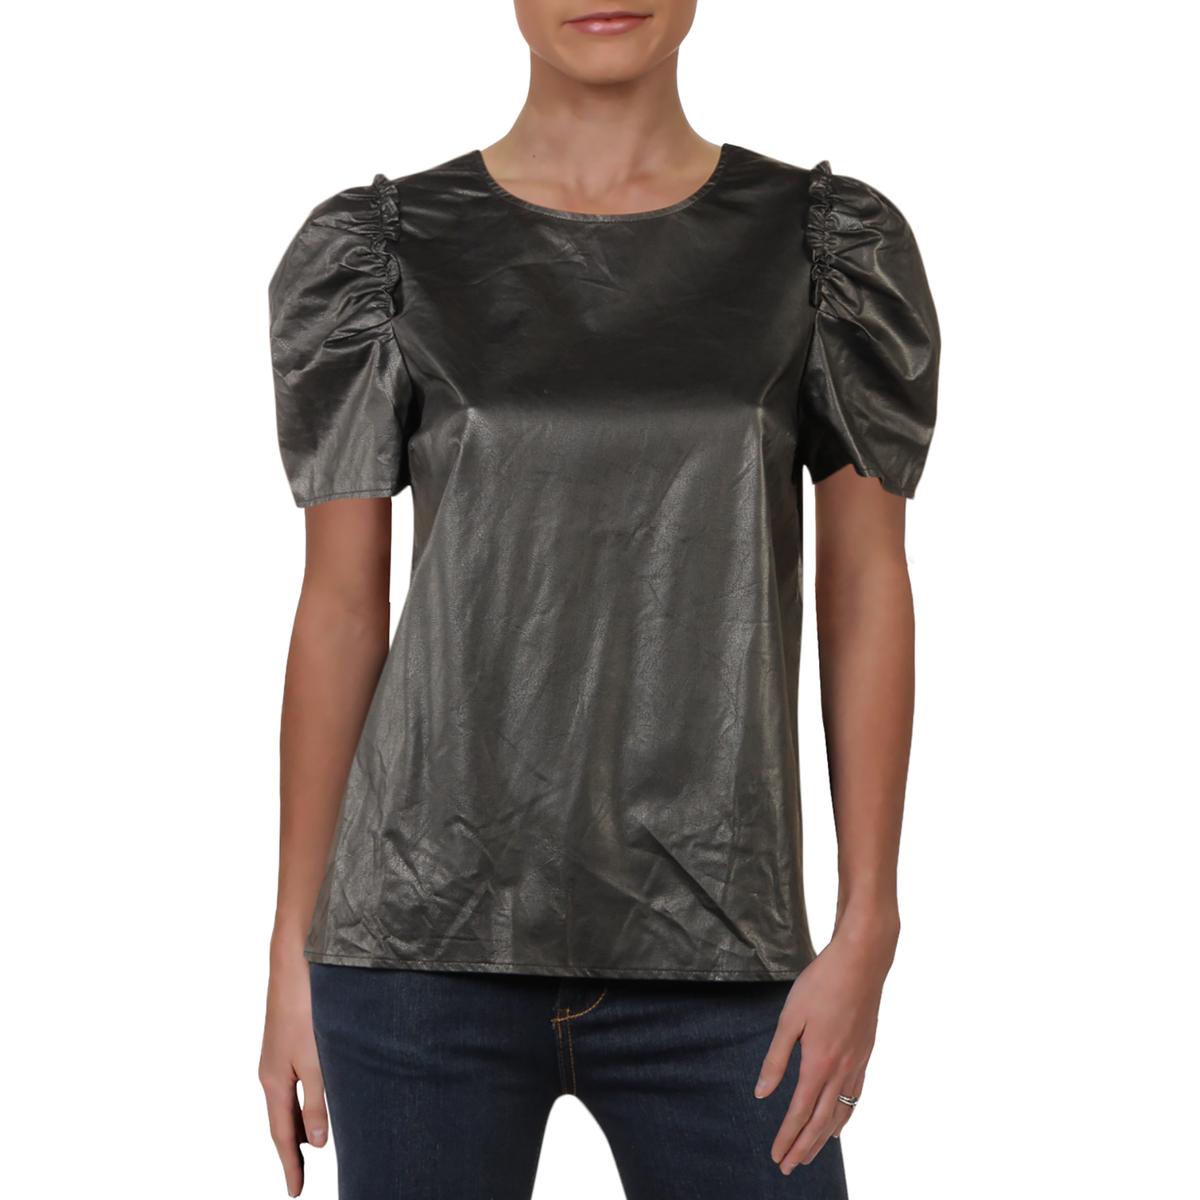 CeCe Womens Black Pleather Short Sleeves Ruffled Blouse Top S BHFO 8321